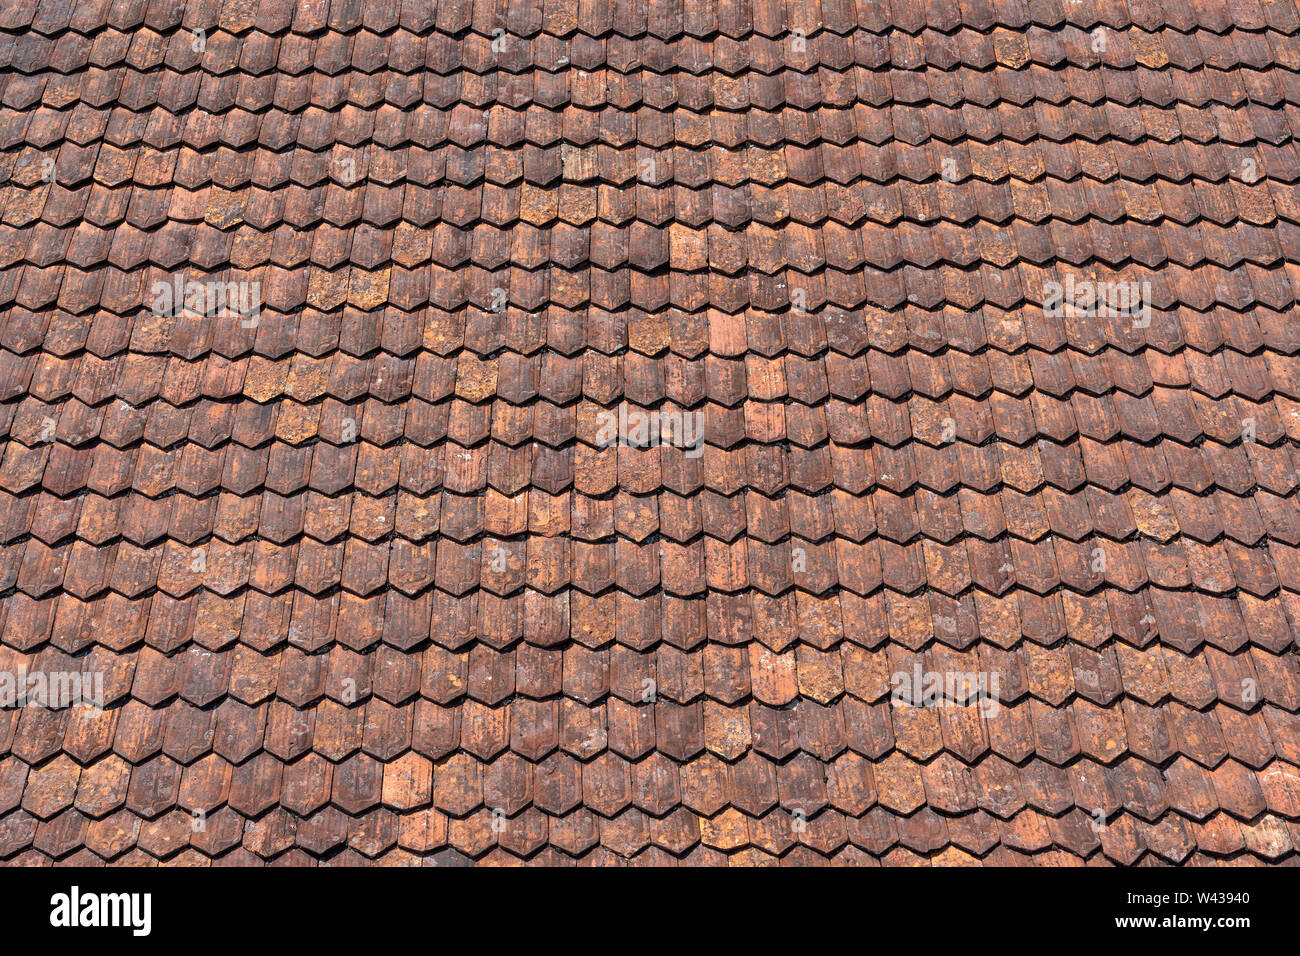 Old red brown tile roof Stock Photo